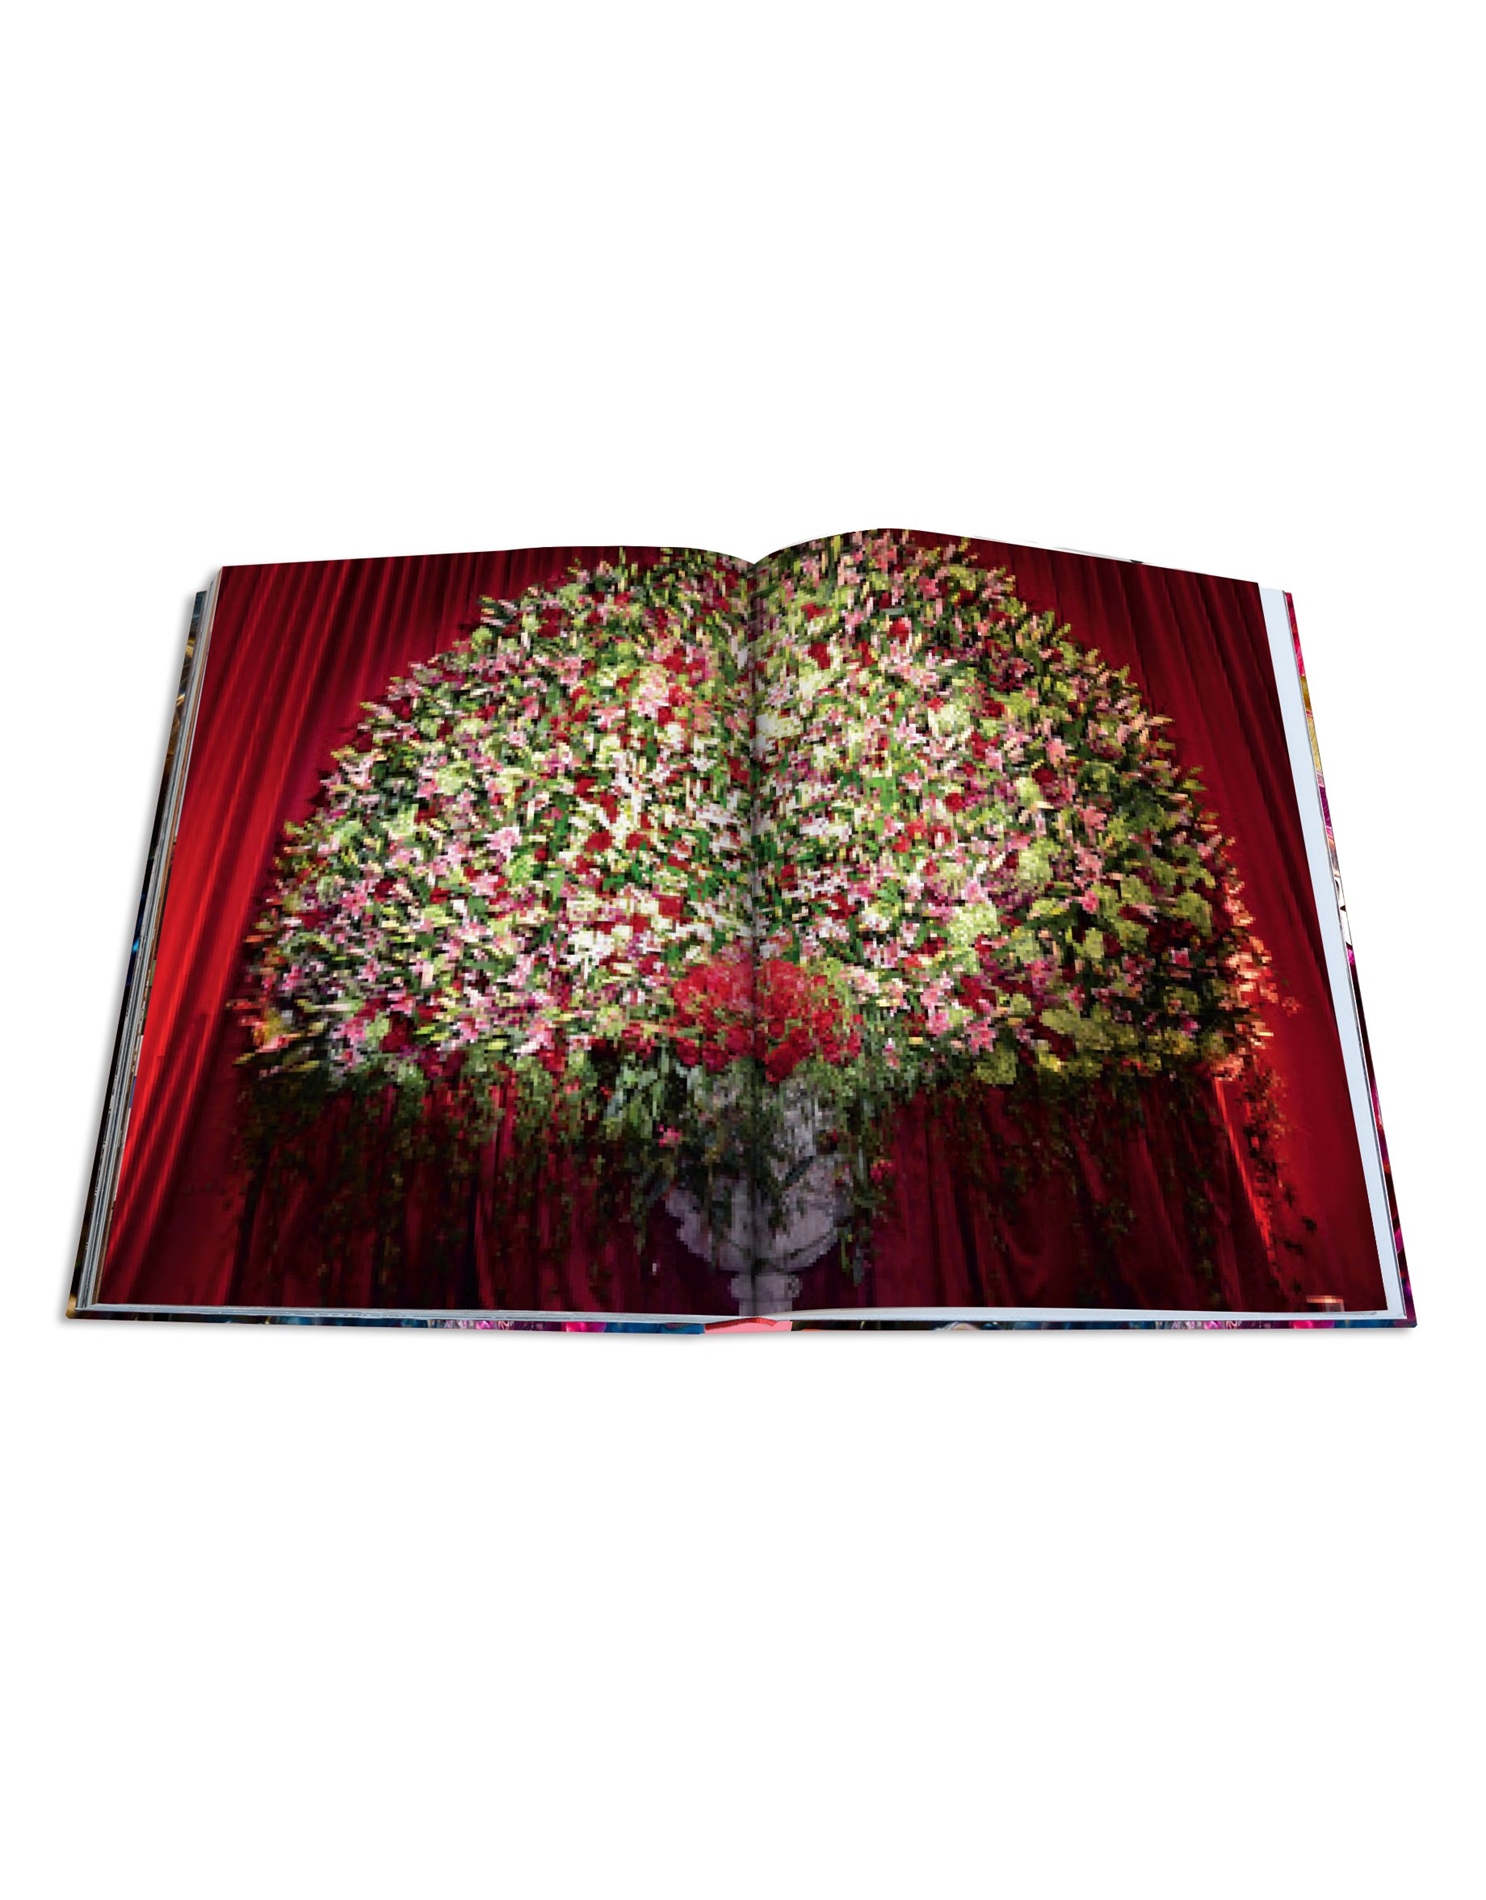 Flowers: Art & Bouquets by Sixtine Dubly - Coffee Table Book